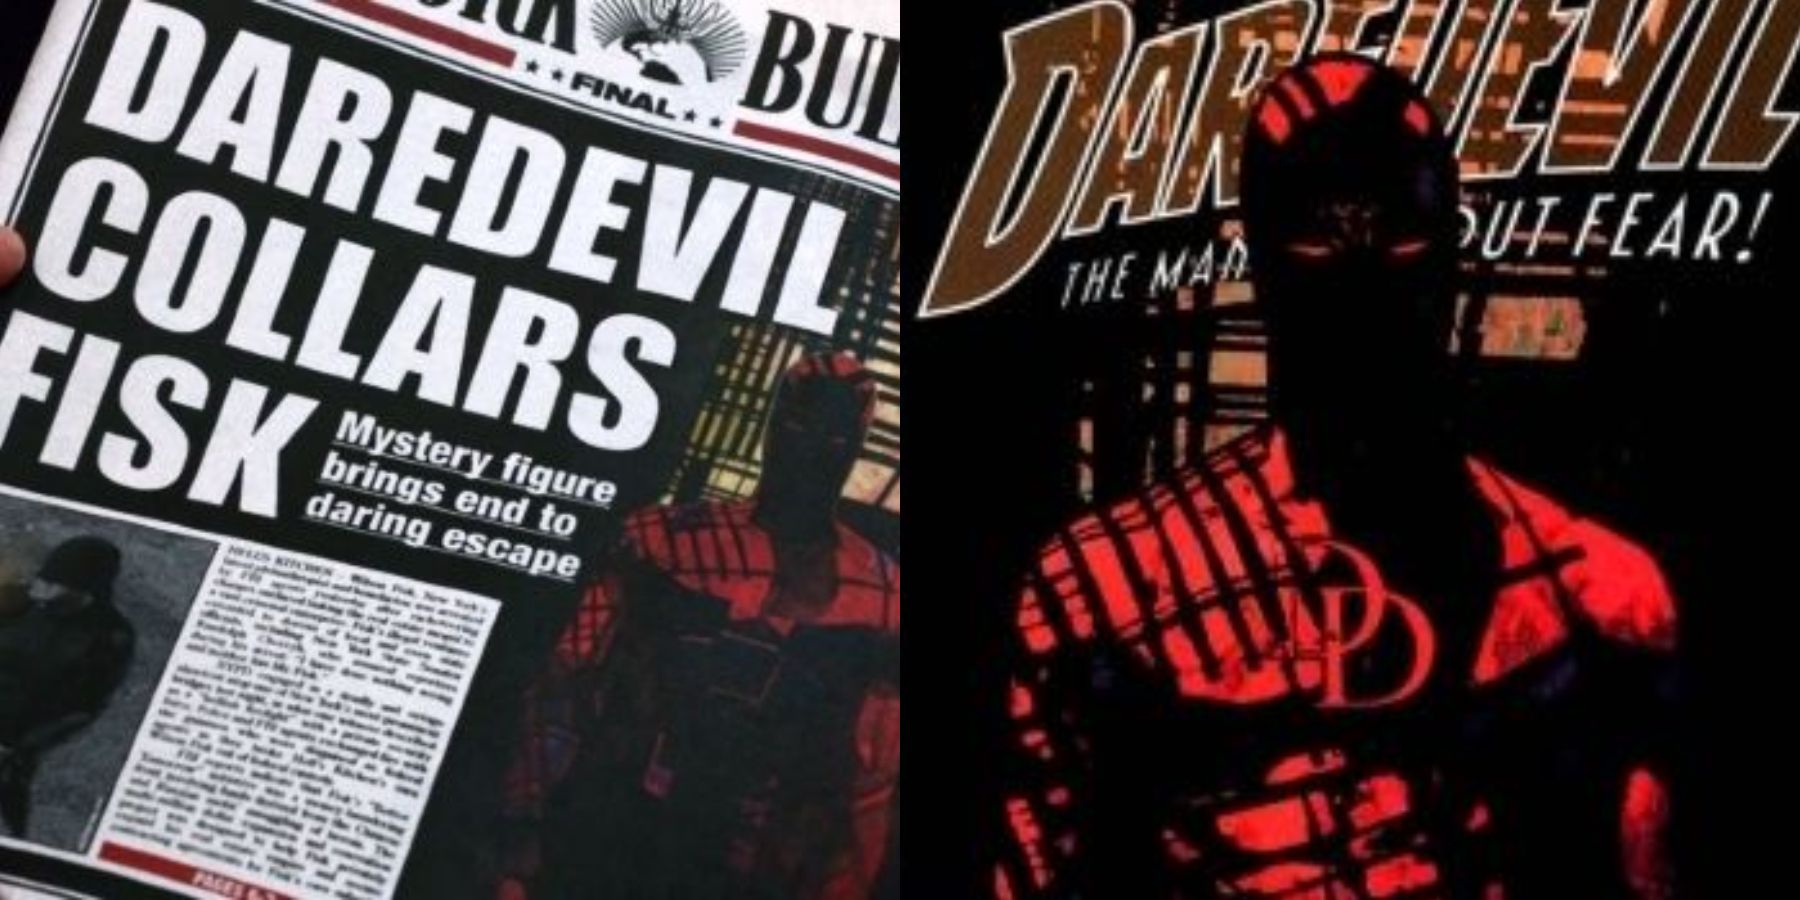 Alex Maleev's cover artwork for Daredevil, featured in the Netflix series